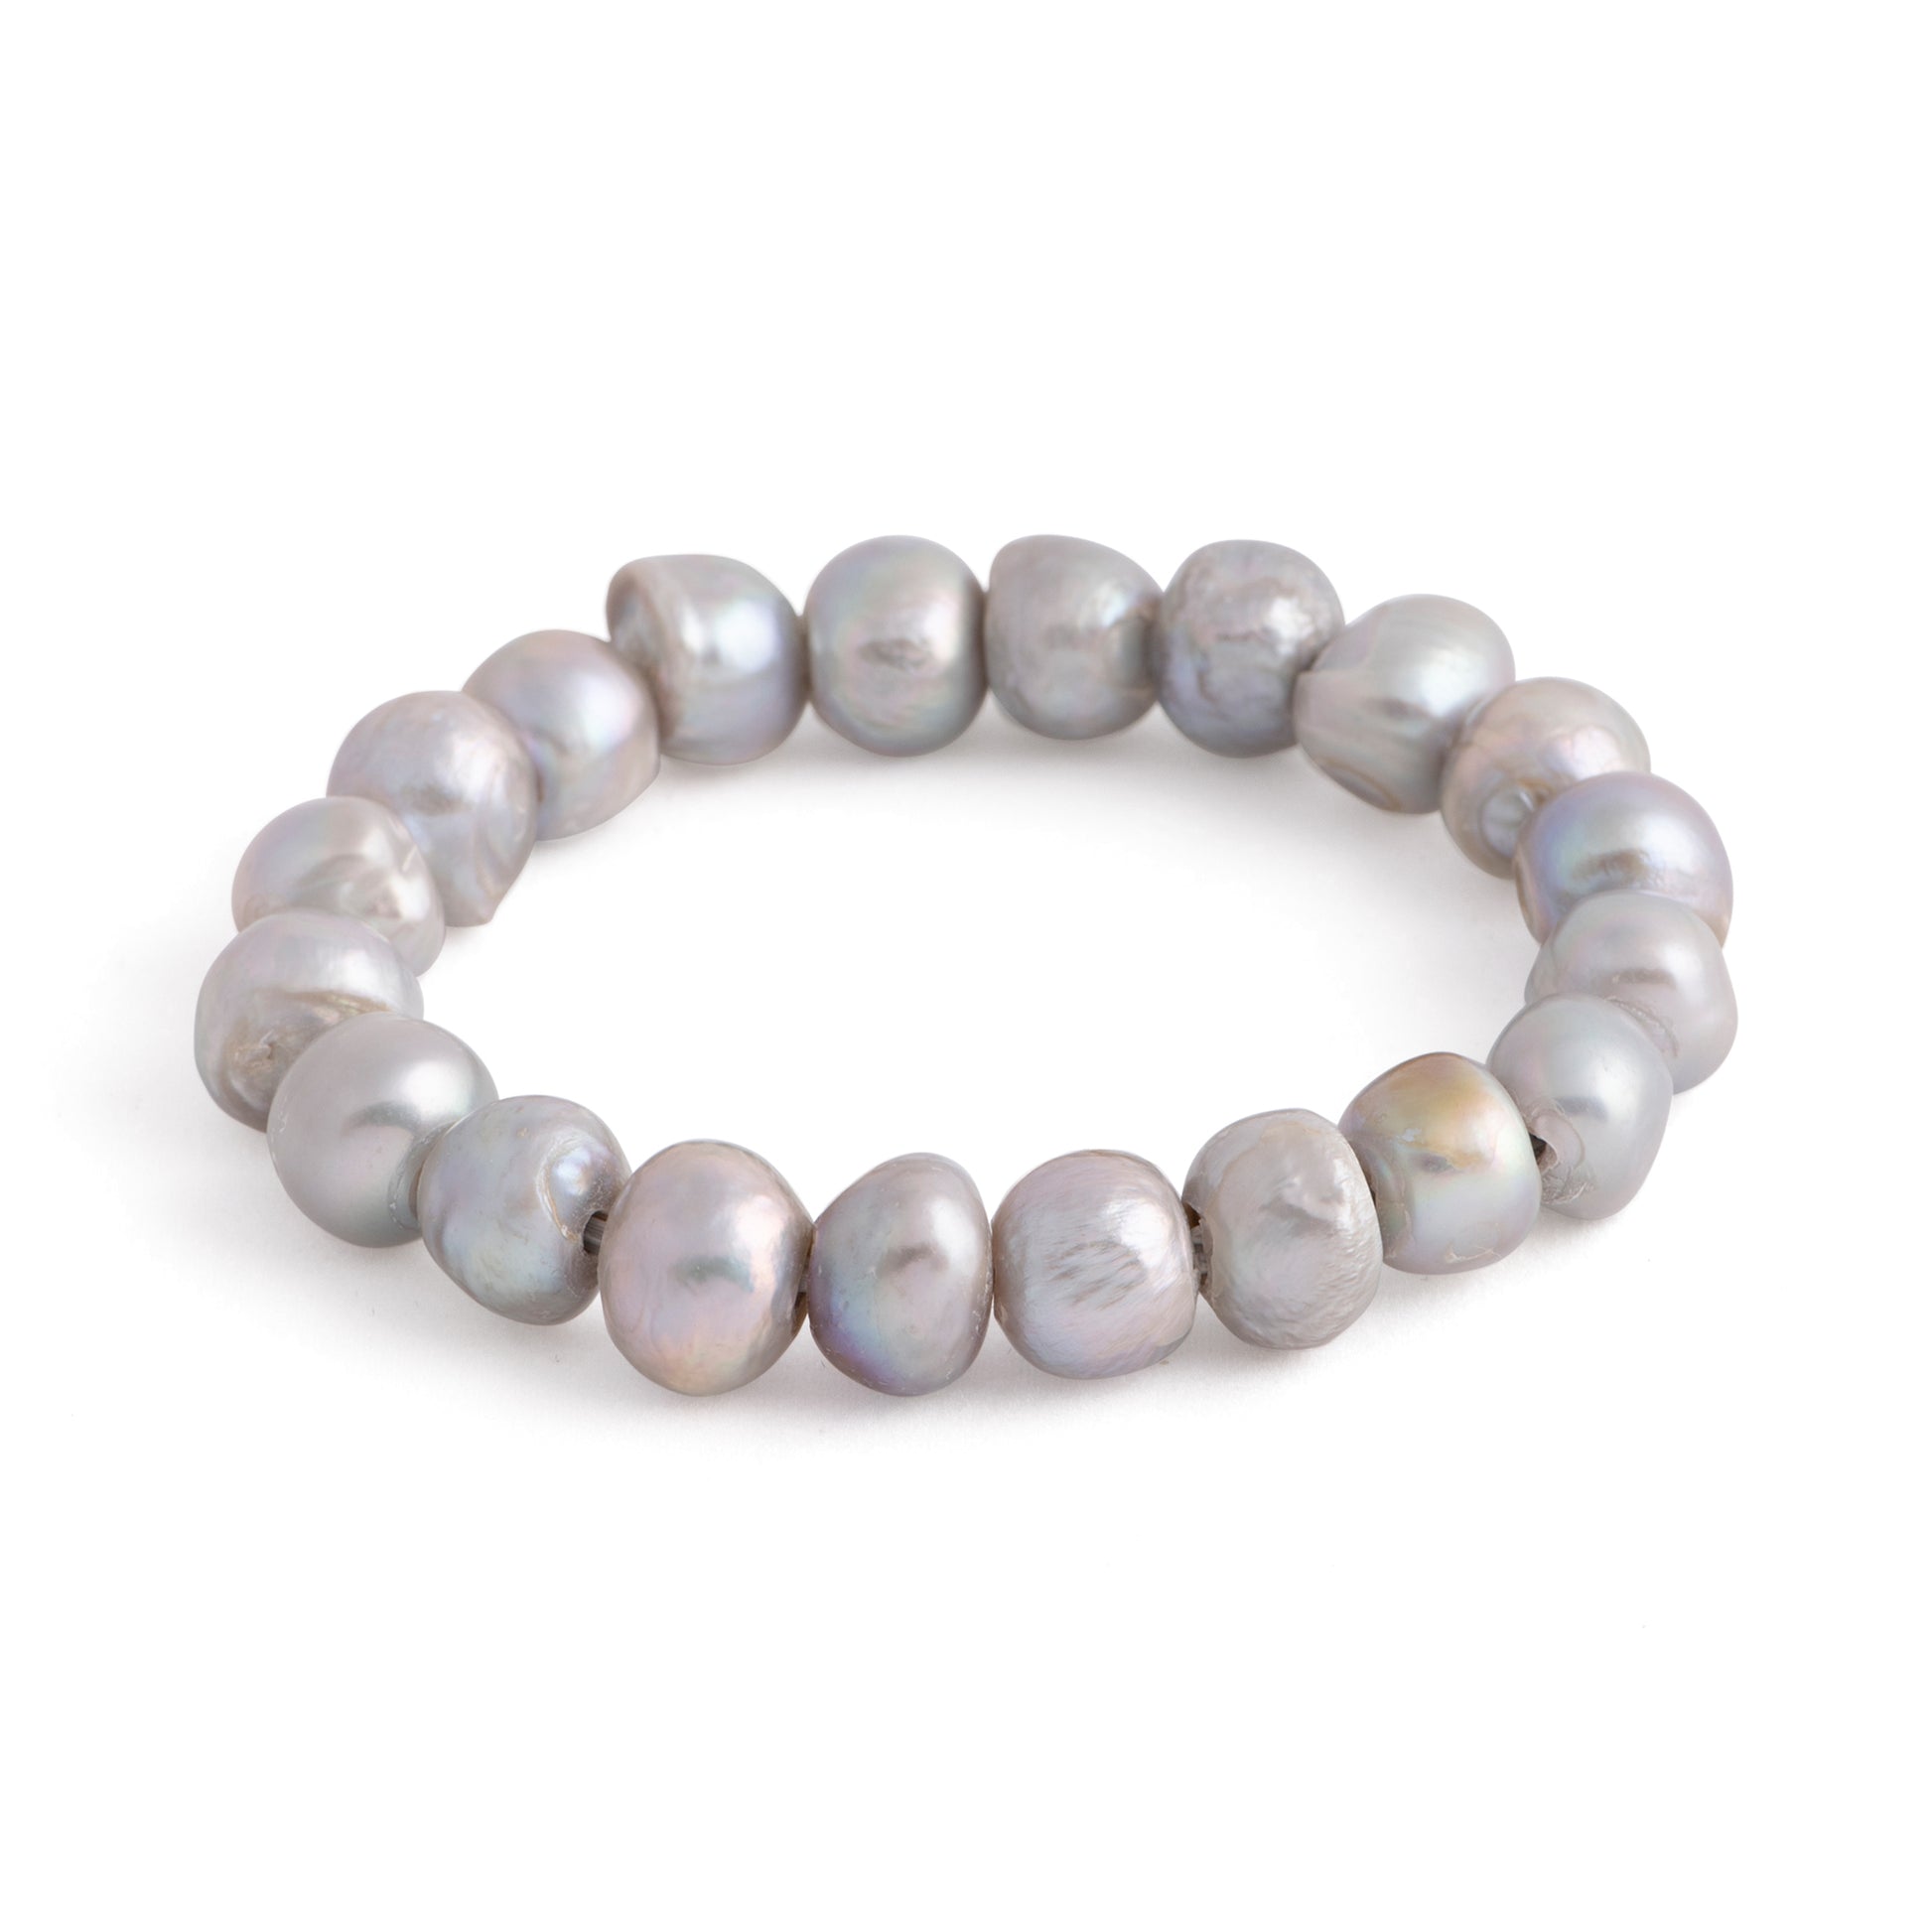 Euphrates - Freshwater pearl stretch bracelet (Silver pearls)